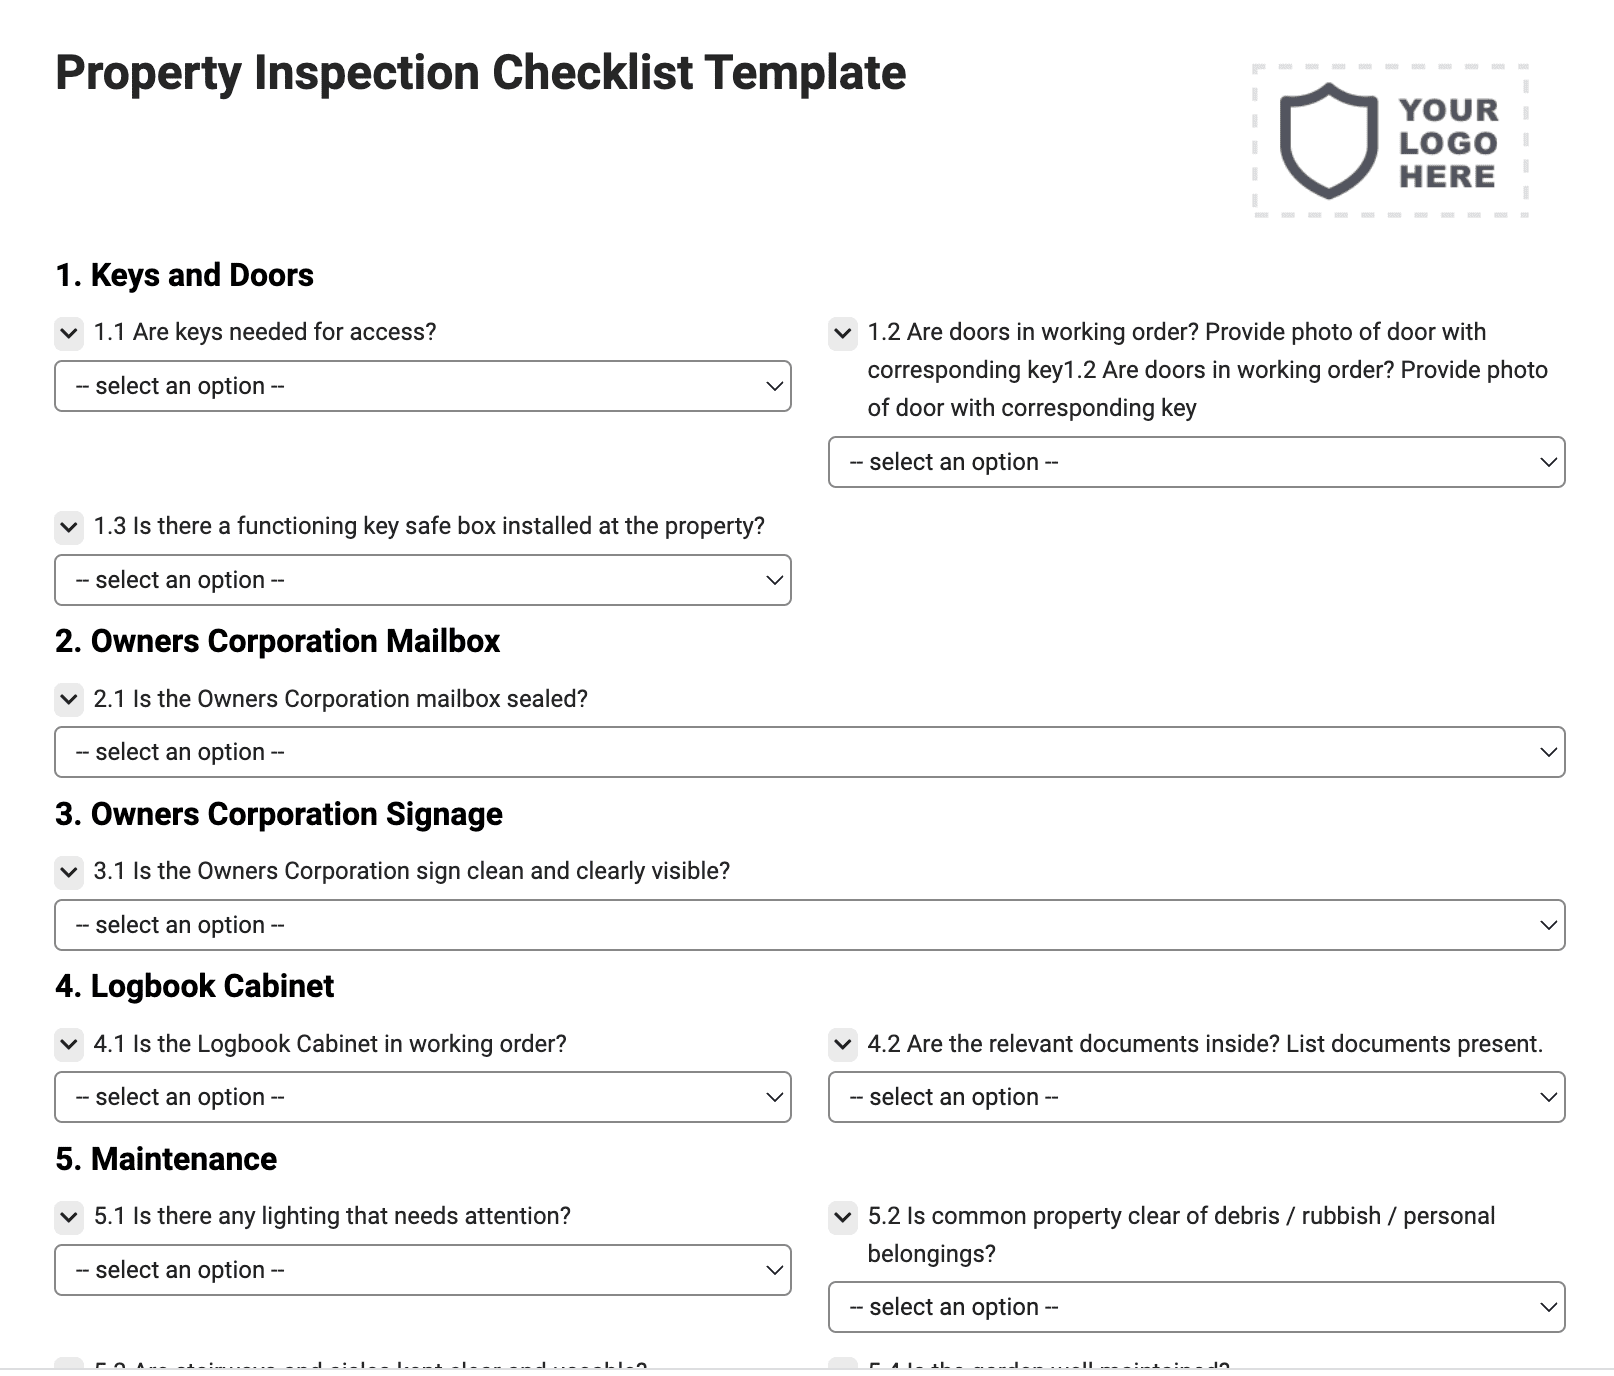 Property Inspection Checklist Template